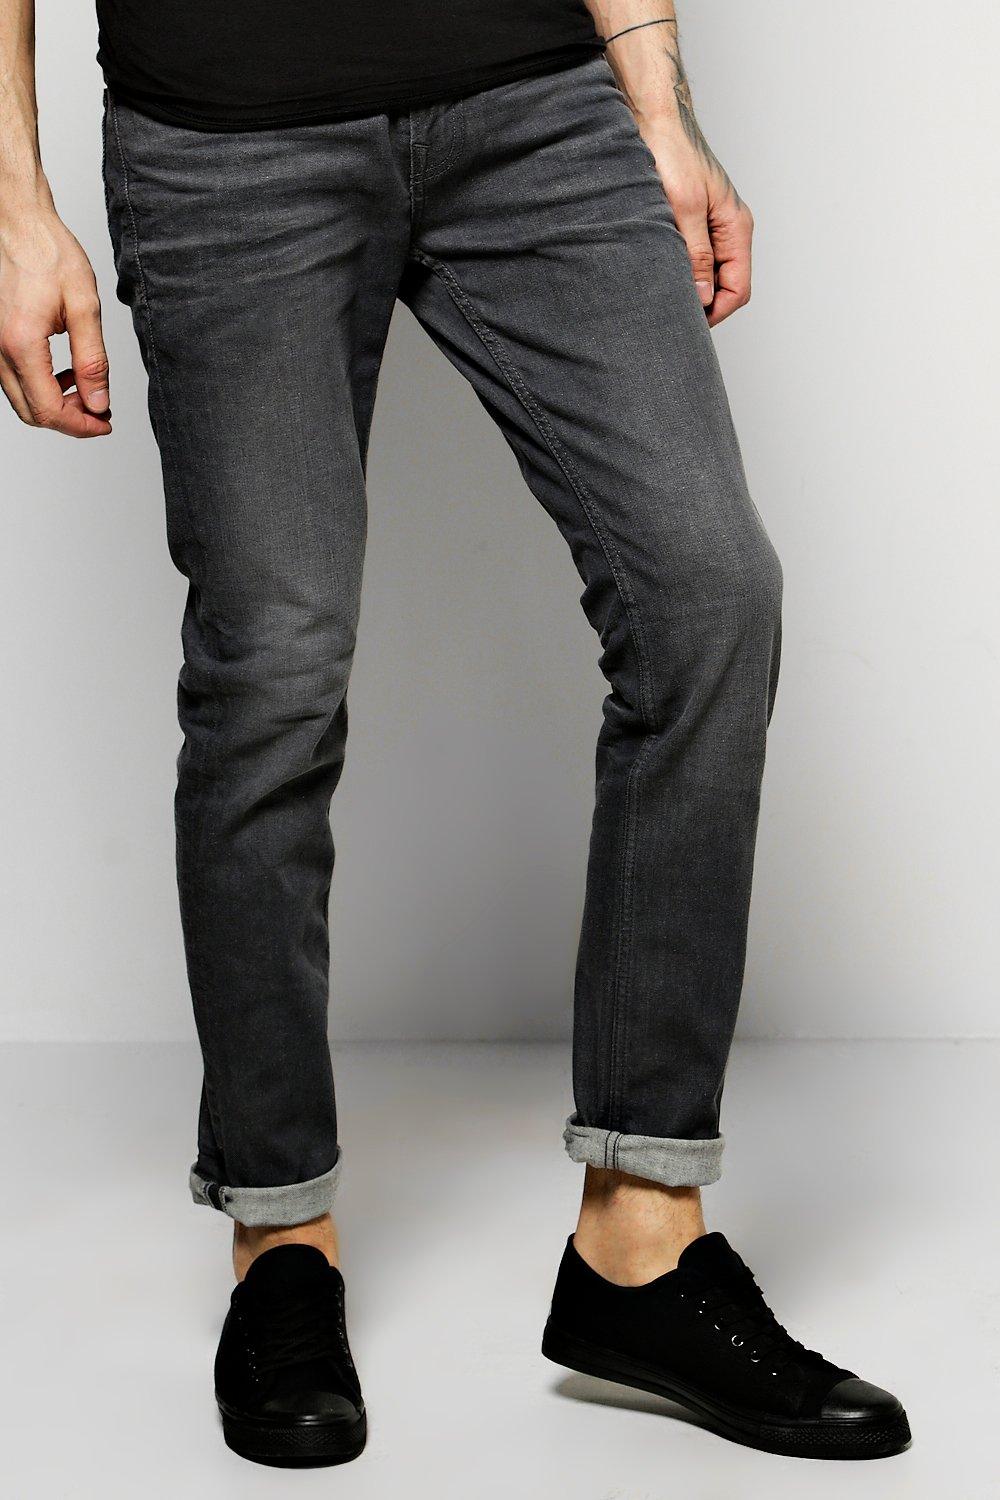 NEW Boohoo Mens Skinny Fit Stone Washed Fashion Jeans in | eBay